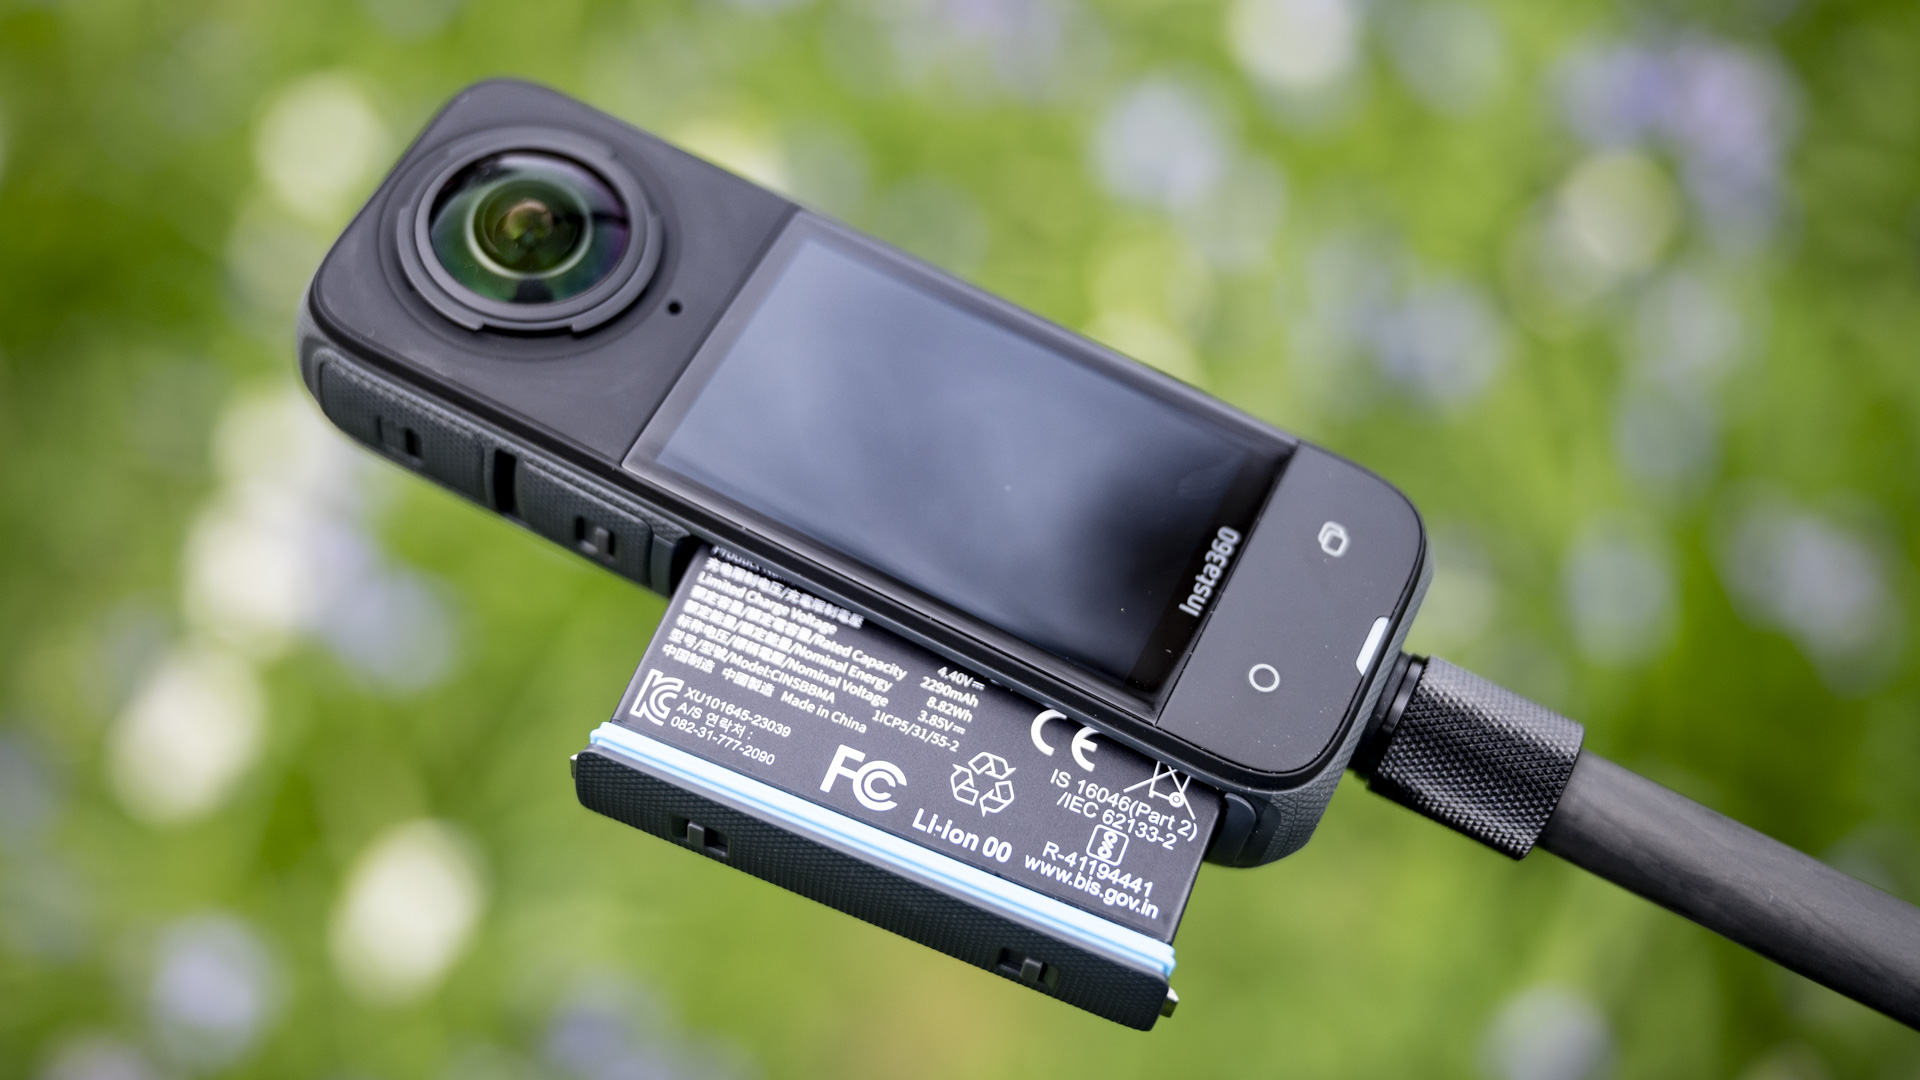 Battery of Insta360 X4 360 degree camera outdoors with vibrant grassy background